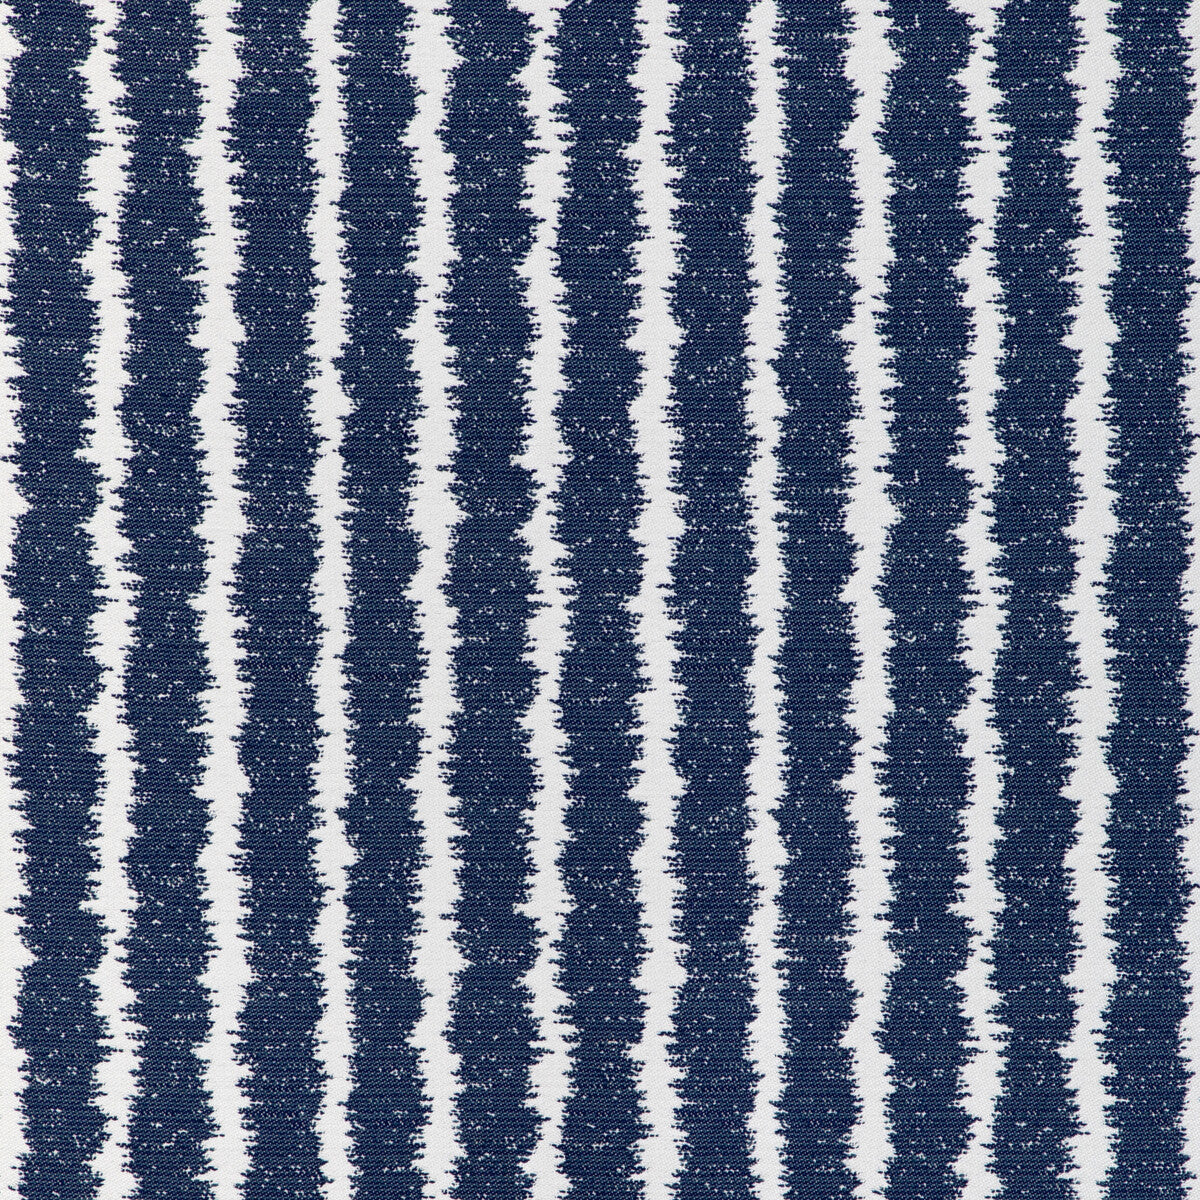 Seaport Stripe fabric in marine color - pattern 36917.5.0 - by Kravet Couture in the Riviera collection